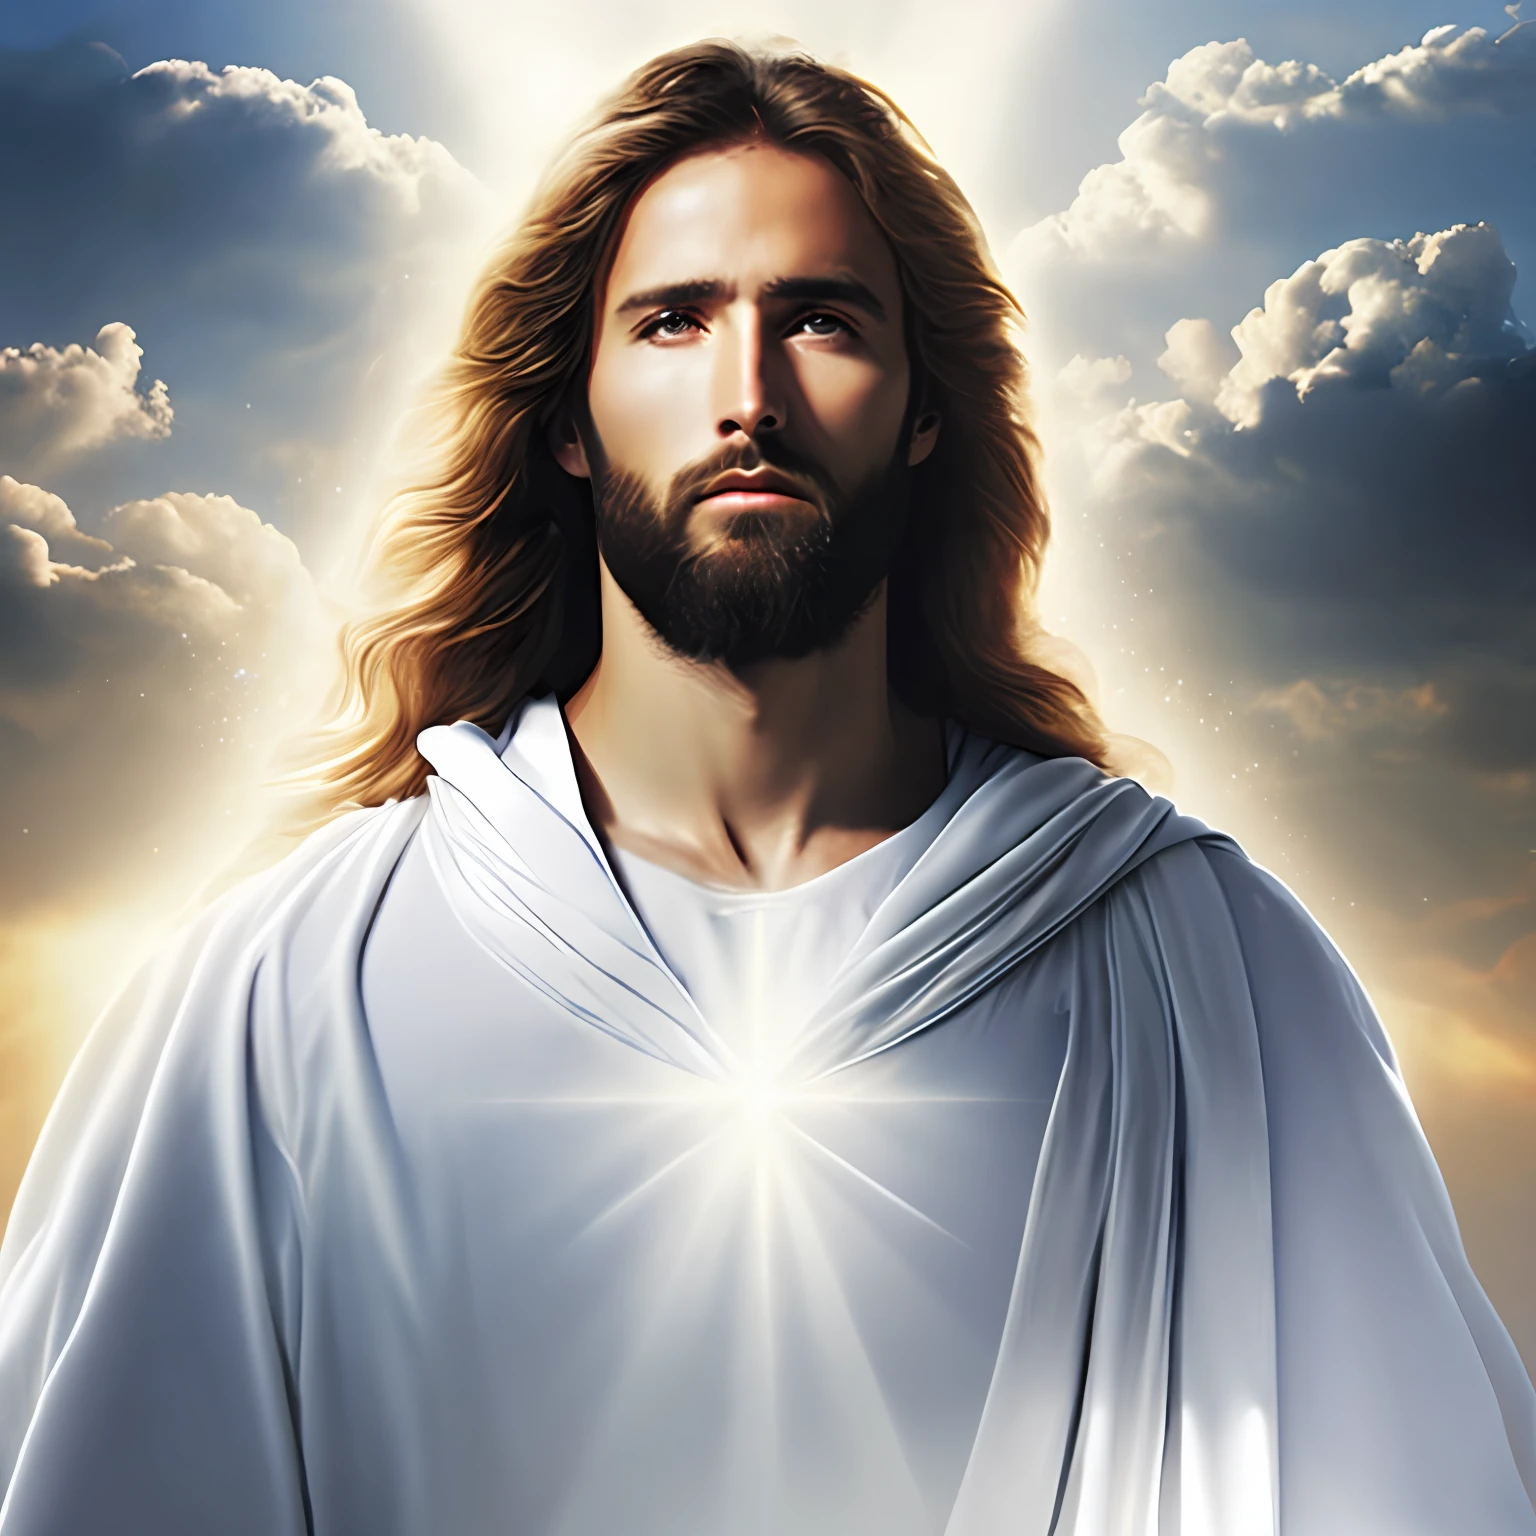 Jesus Christ in humble white clothes in the clouds toward the gates of heaven, insanely realistic with rays of light on his face